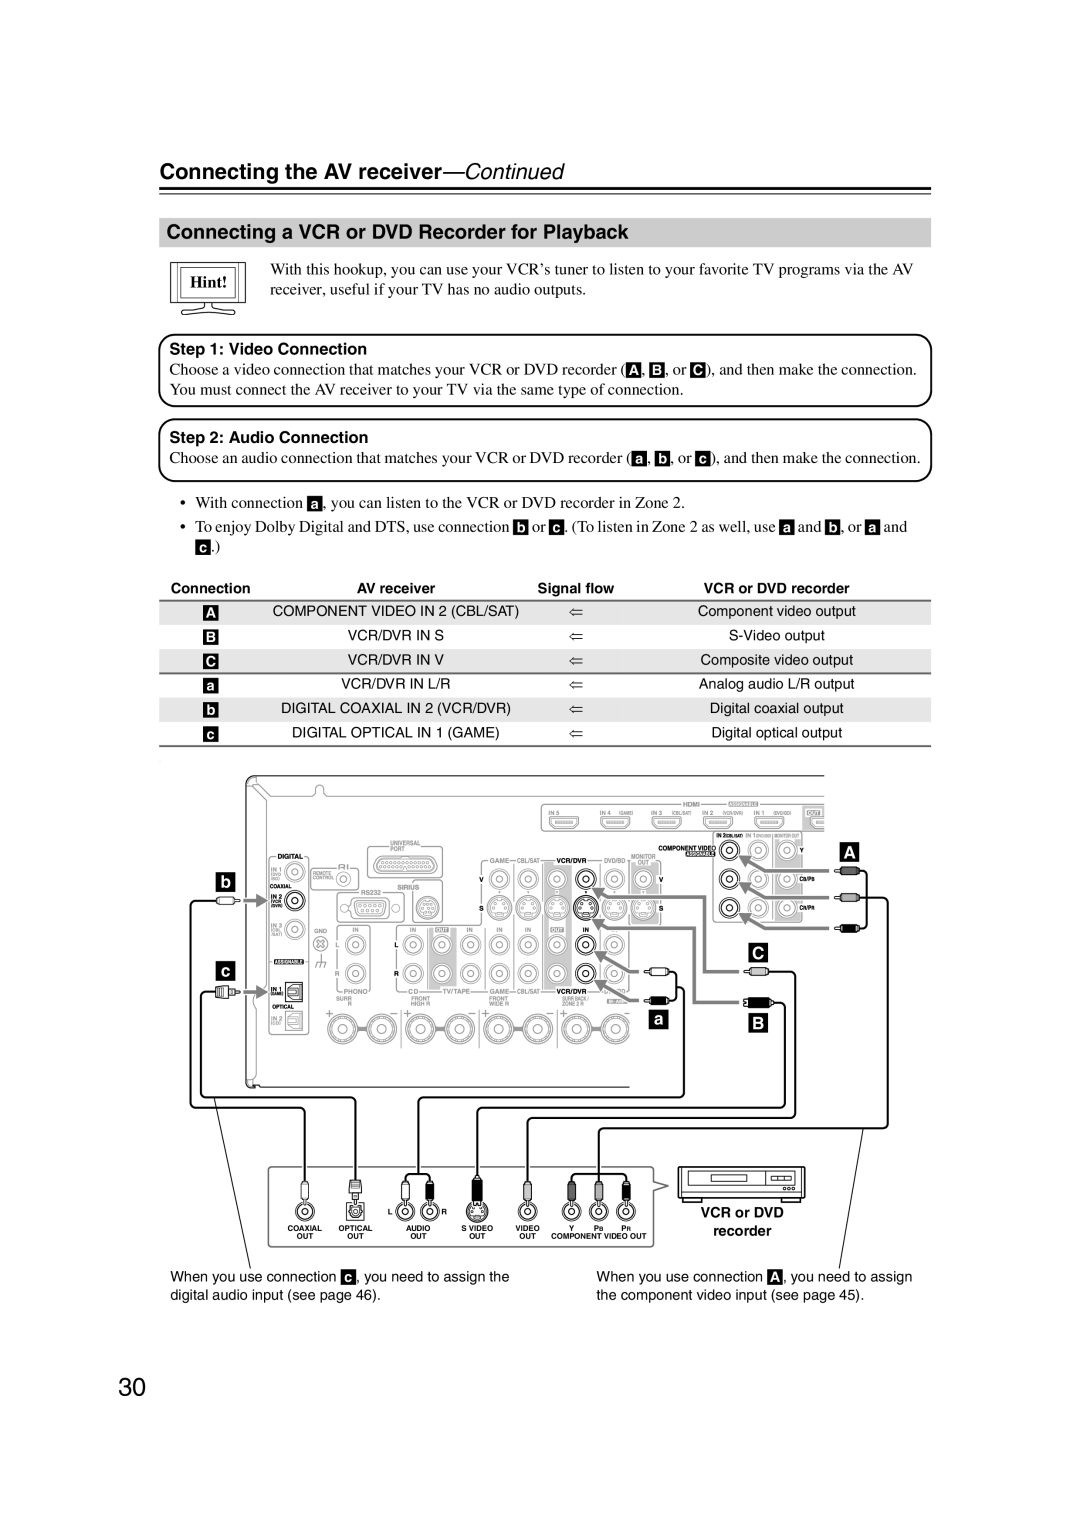 Onkyo TX-SR707 instruction manual Connecting a VCR or DVD Recorder for Playback, Connecting the AV receiver—Continued, Hint 